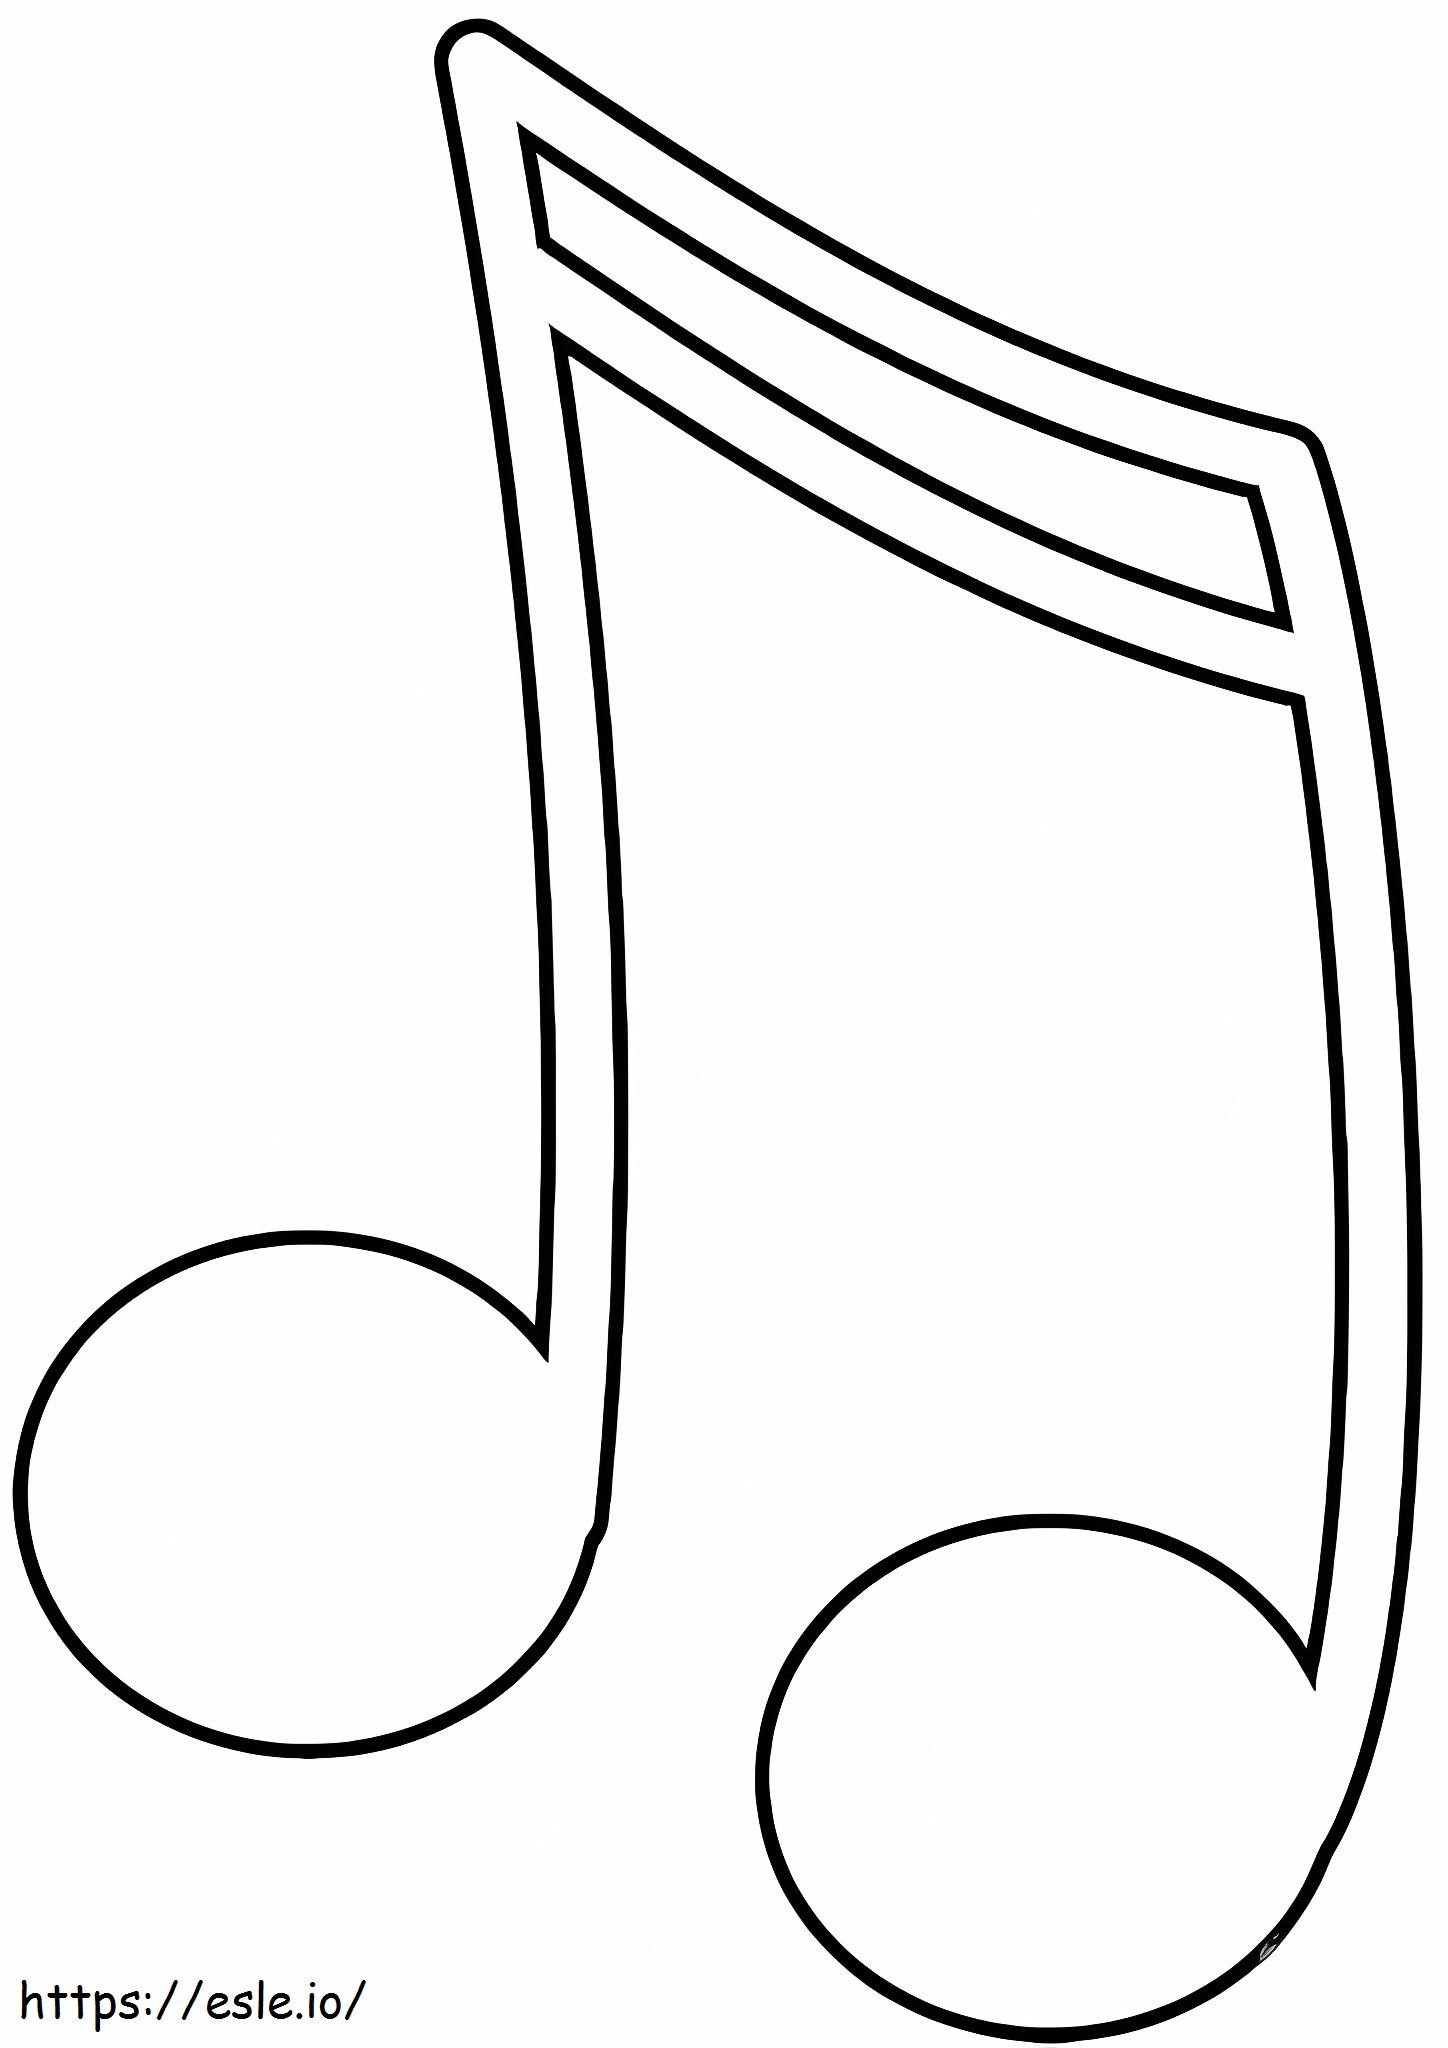 A Musical Note coloring page